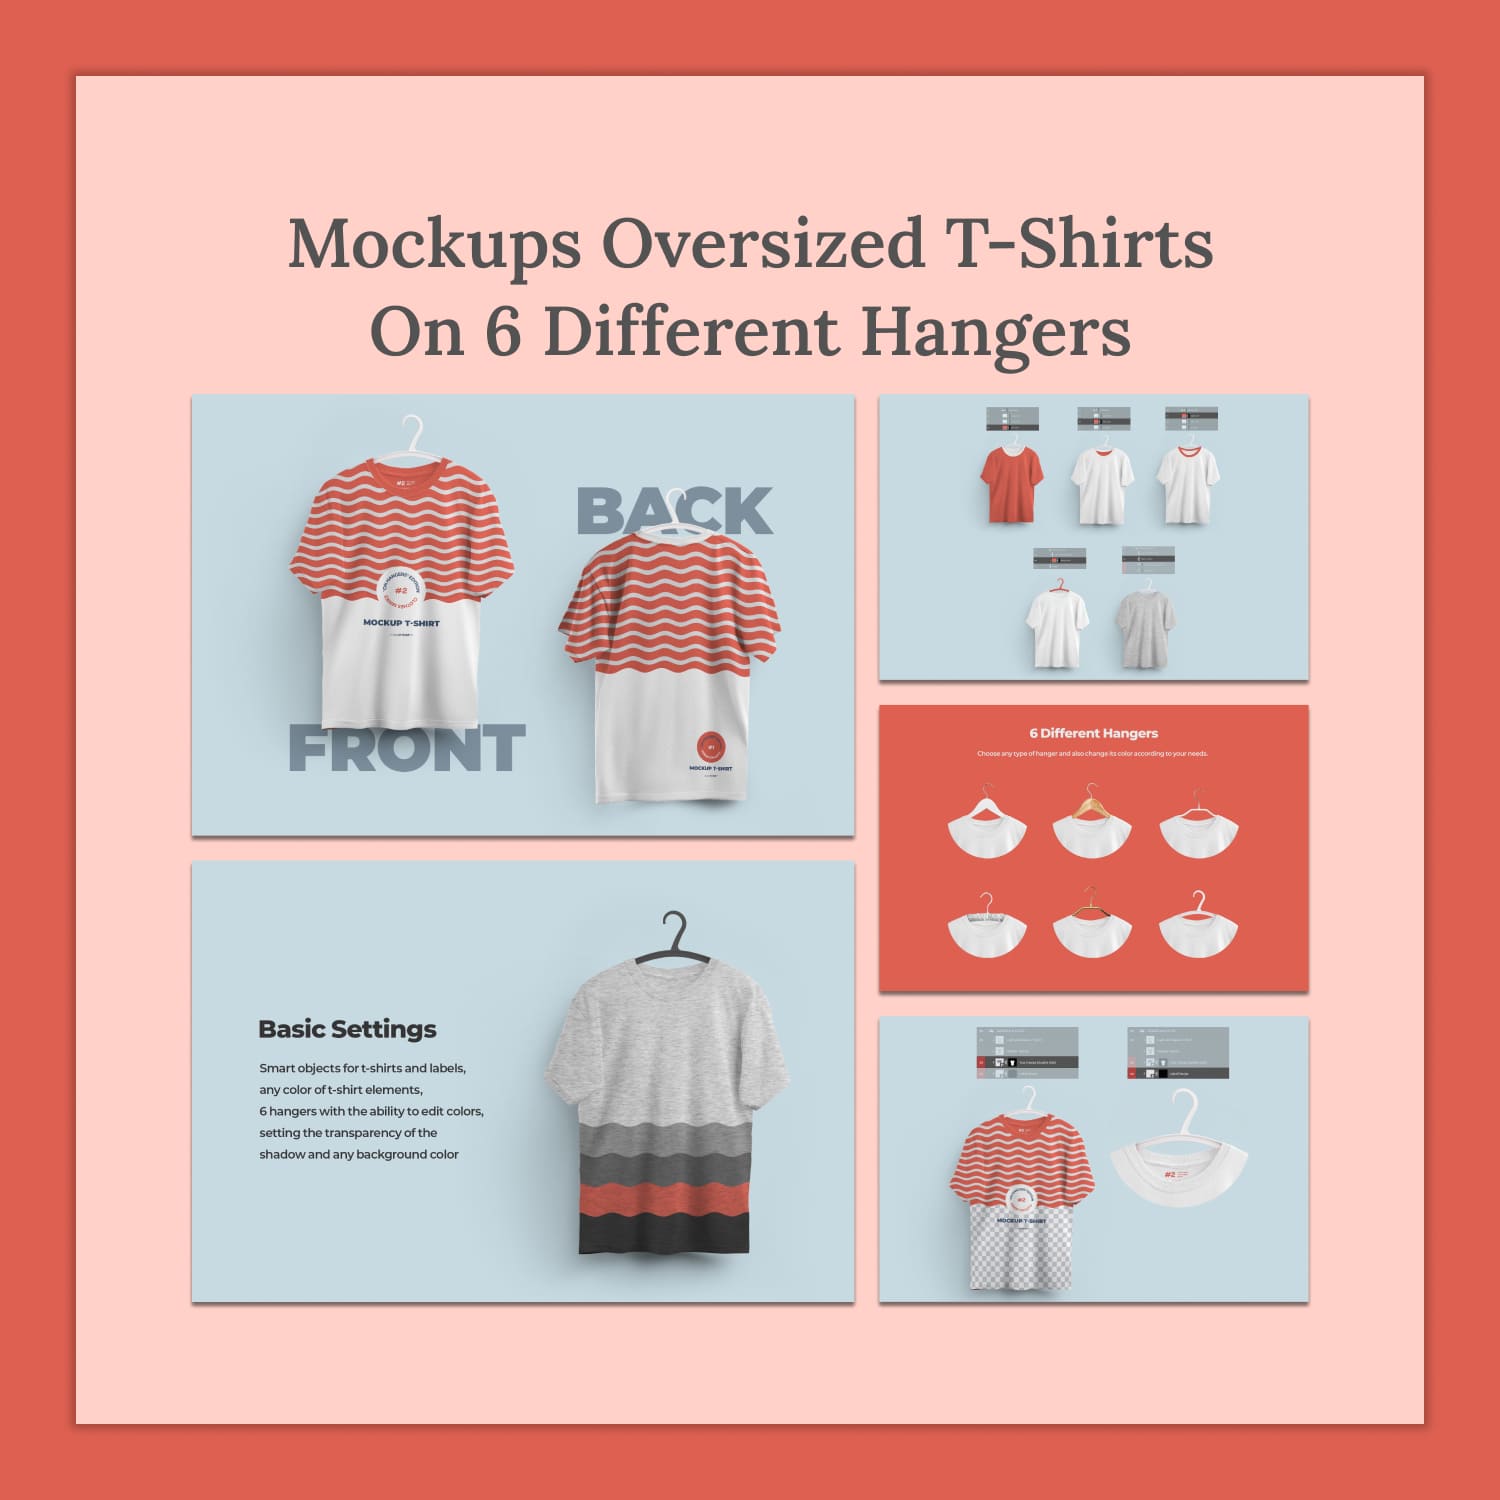 2 Mockups Oversized T-Shirts On 6 Different Hangers.